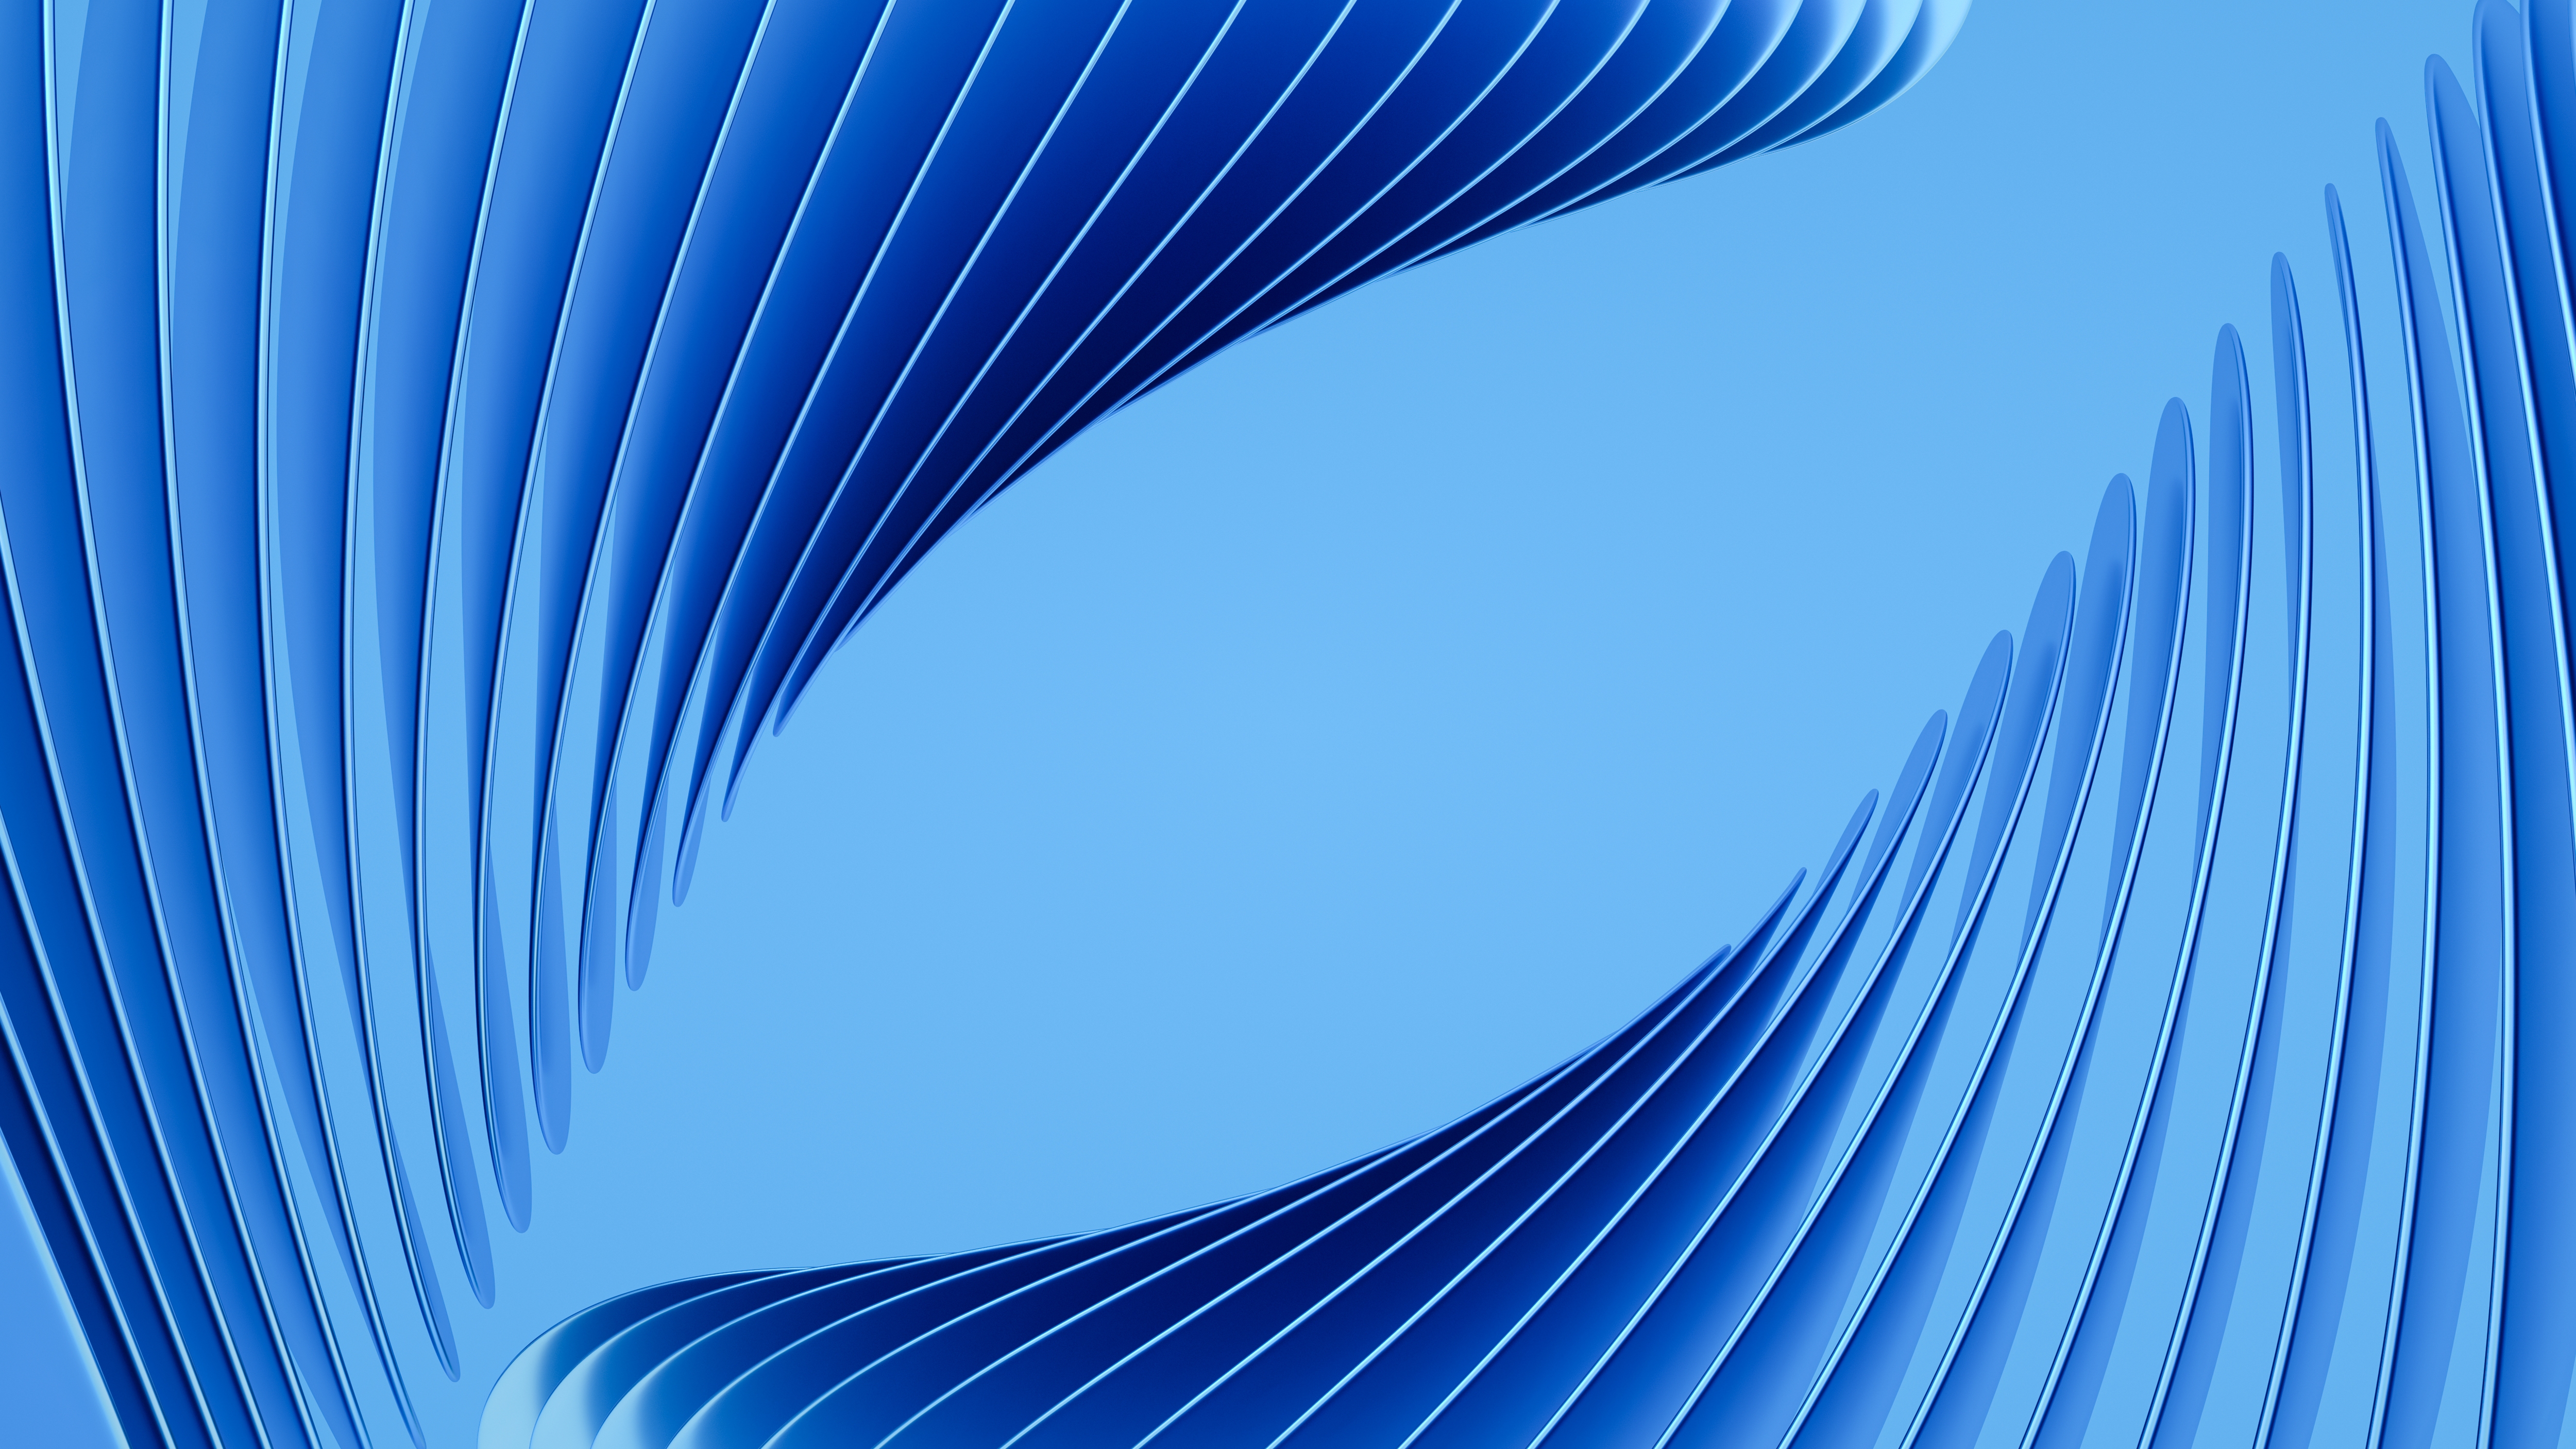 HD wallpaper, 3D Background, 5K, Blue Background, Abstract Background